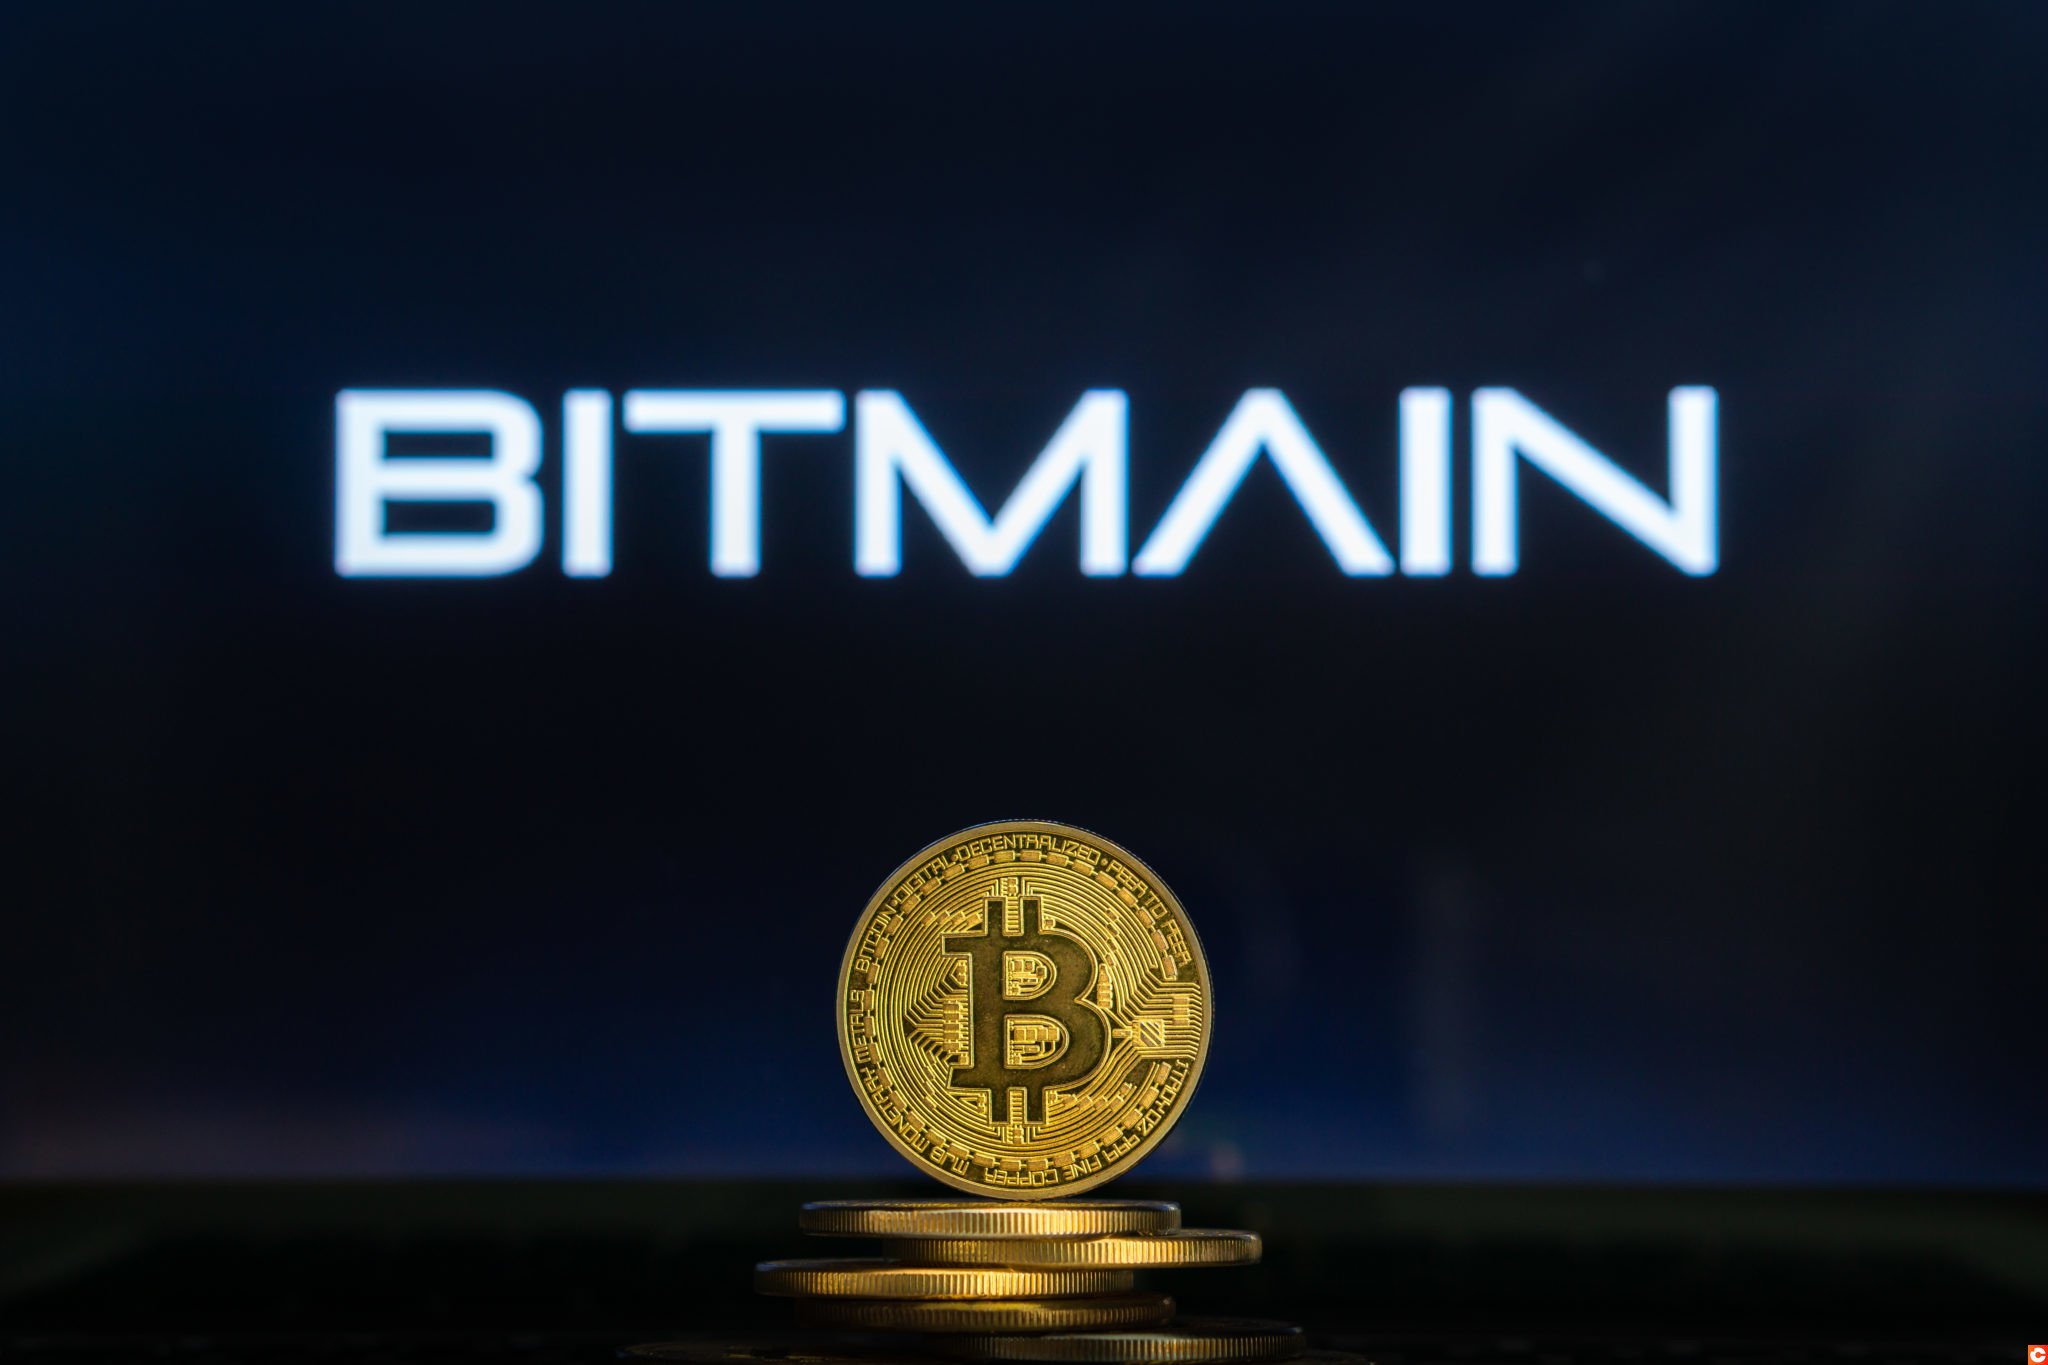 Bitmain logo on a computer screen with a stack of Bitcoin cryptocurency coins.